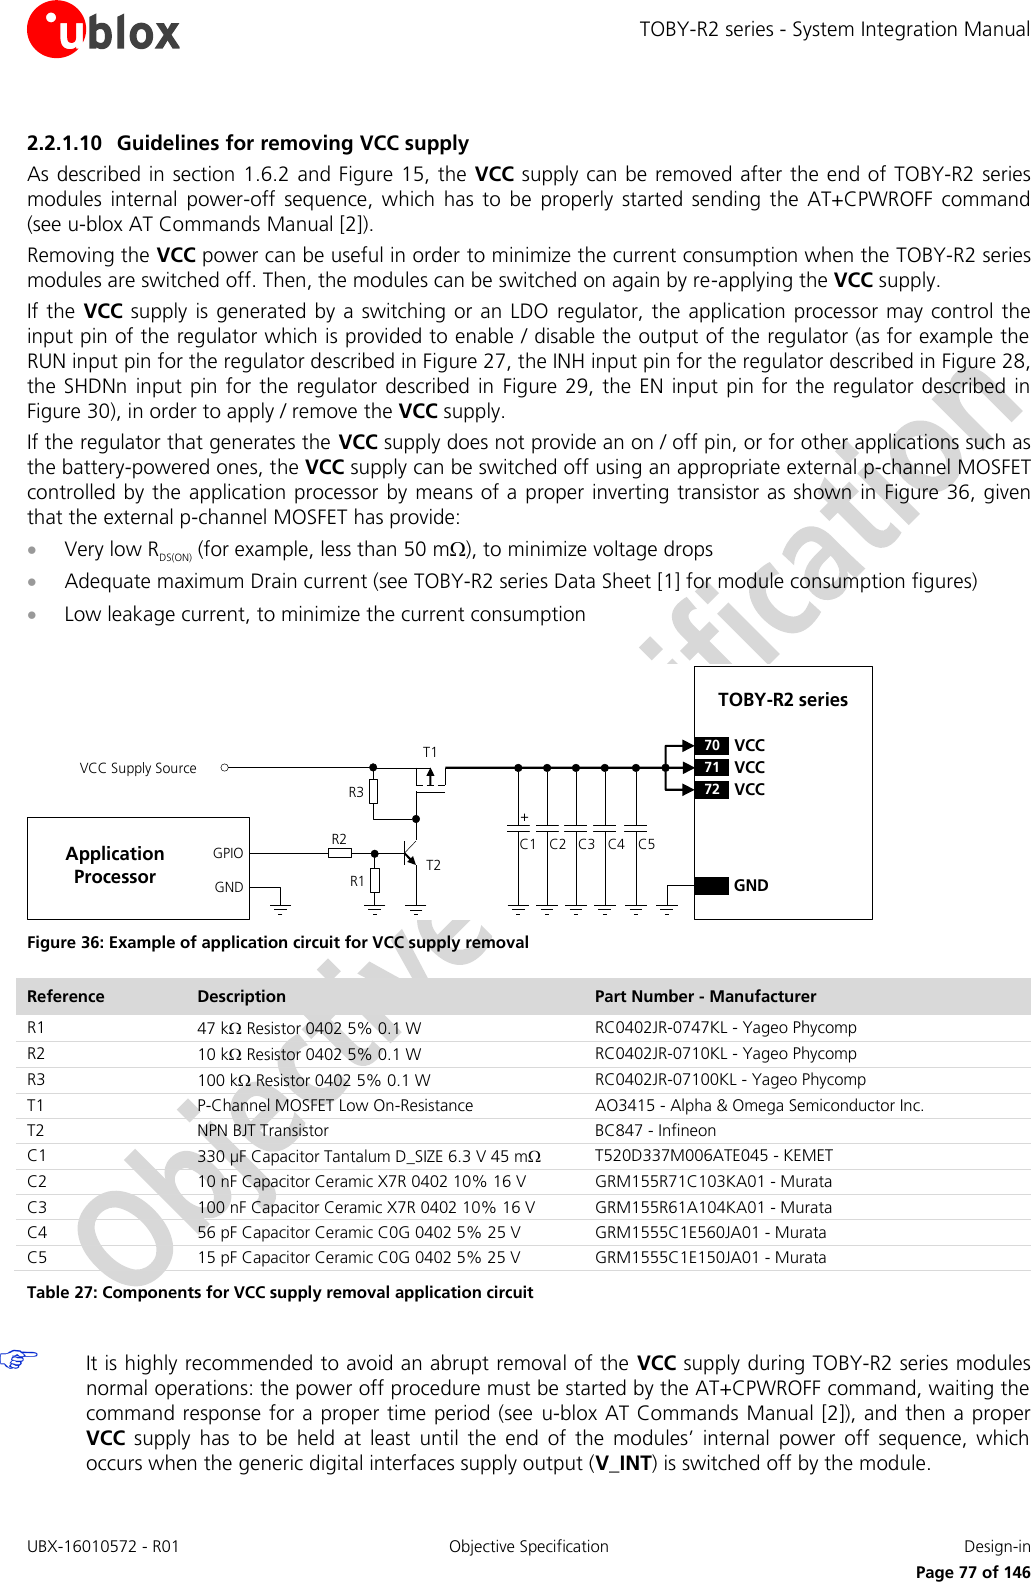 TOBY-R2 series - System Integration Manual UBX-16010572 - R01  Objective Specification  Design-in     Page 77 of 146 2.2.1.10 Guidelines for removing VCC supply As described in section 1.6.2 and Figure 15, the  VCC supply can be removed after the end of  TOBY-R2 series modules  internal  power-off  sequence,  which  has  to  be  properly  started  sending  the  AT+CPWROFF  command (see u-blox AT Commands Manual [2]).  Removing the VCC power can be useful in order to minimize the current consumption when the TOBY-R2 series modules are switched off. Then, the modules can be switched on again by re-applying the VCC supply. If the VCC supply  is  generated  by  a  switching or an LDO  regulator, the application processor  may control the input pin of the regulator which is provided to enable / disable the output of the regulator (as for example the RUN input pin for the regulator described in Figure 27, the INH input pin for the regulator described in Figure 28, the SHDNn  input pin for  the regulator  described in  Figure  29, the EN  input pin for the  regulator  described  in Figure 30), in order to apply / remove the VCC supply. If the regulator that generates the VCC supply does not provide an on / off pin, or for other applications such as the battery-powered ones, the VCC supply can be switched off using an appropriate external p-channel MOSFET controlled by the application processor  by  means of a  proper inverting transistor as shown in Figure 36, given that the external p-channel MOSFET has provide:  Very low RDS(ON) (for example, less than 50 m), to minimize voltage drops   Adequate maximum Drain current (see TOBY-R2 series Data Sheet [1] for module consumption figures)  Low leakage current, to minimize the current consumption  C3GNDC2C1 C4TOBY-R2 series71 VCC72 VCC70 VCC+VCC Supply SourceGNDGPIO C5R1R3R2T2T1Application Processor Figure 36: Example of application circuit for VCC supply removal Reference Description Part Number - Manufacturer R1 47 k Resistor 0402 5% 0.1 W  RC0402JR-0747KL - Yageo Phycomp R2 10 k Resistor 0402 5% 0.1 W  RC0402JR-0710KL - Yageo Phycomp R3 100 k Resistor 0402 5% 0.1 W  RC0402JR-07100KL - Yageo Phycomp T1 P-Channel MOSFET Low On-Resistance AO3415 - Alpha &amp; Omega Semiconductor Inc.  T2 NPN BJT Transistor BC847 - Infineon C1 330 µF Capacitor Tantalum D_SIZE 6.3 V 45 m T520D337M006ATE045 - KEMET C2 10 nF Capacitor Ceramic X7R 0402 10% 16 V GRM155R71C103KA01 - Murata C3 100 nF Capacitor Ceramic X7R 0402 10% 16 V GRM155R61A104KA01 - Murata C4 56 pF Capacitor Ceramic C0G 0402 5% 25 V GRM1555C1E560JA01 - Murata C5 15 pF Capacitor Ceramic C0G 0402 5% 25 V  GRM1555C1E150JA01 - Murata Table 27: Components for VCC supply removal application circuit   It is highly recommended to avoid an abrupt removal of the VCC supply during TOBY-R2 series modules normal operations: the power off procedure must be started by the AT+CPWROFF command, waiting the command response for a proper time period (see  u-blox AT Commands Manual [2]), and then a proper VCC supply  has  to  be  held  at  least  until  the  end  of  the  modules’  internal  power  off  sequence,  which occurs when the generic digital interfaces supply output (V_INT) is switched off by the module.  